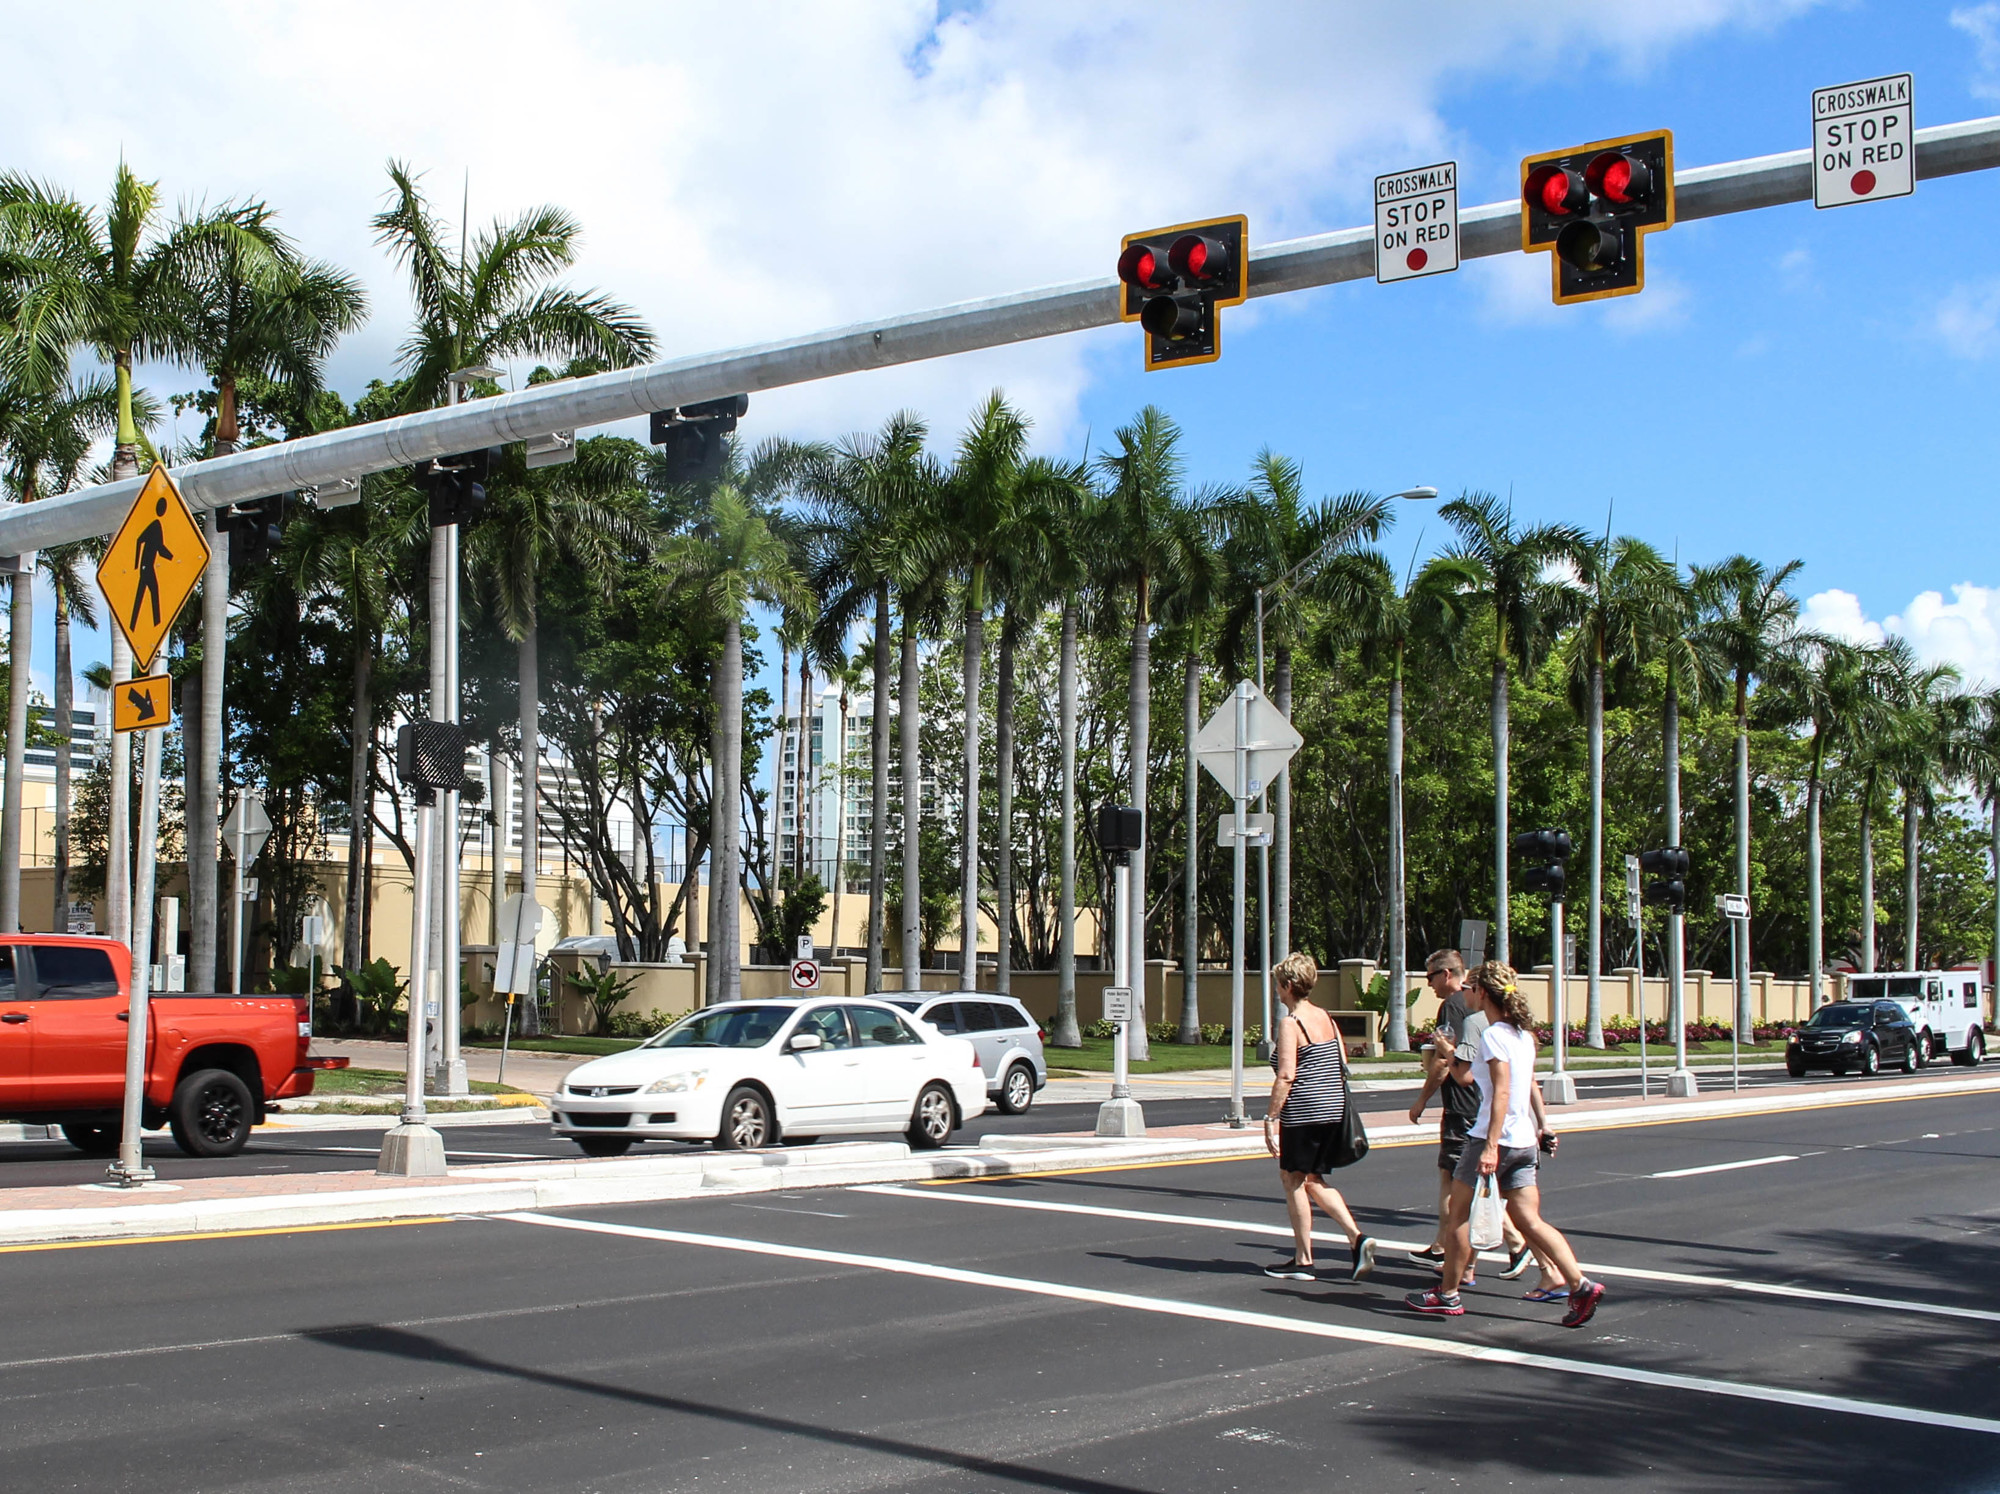 Pedestrian hybrid beacons are formerly known as the high-intensity activated crosswalks: A traffic control device that requires motorists to stop when the light is red. PHBs are utilized along U.S. 41 near First Street in Sarasota.